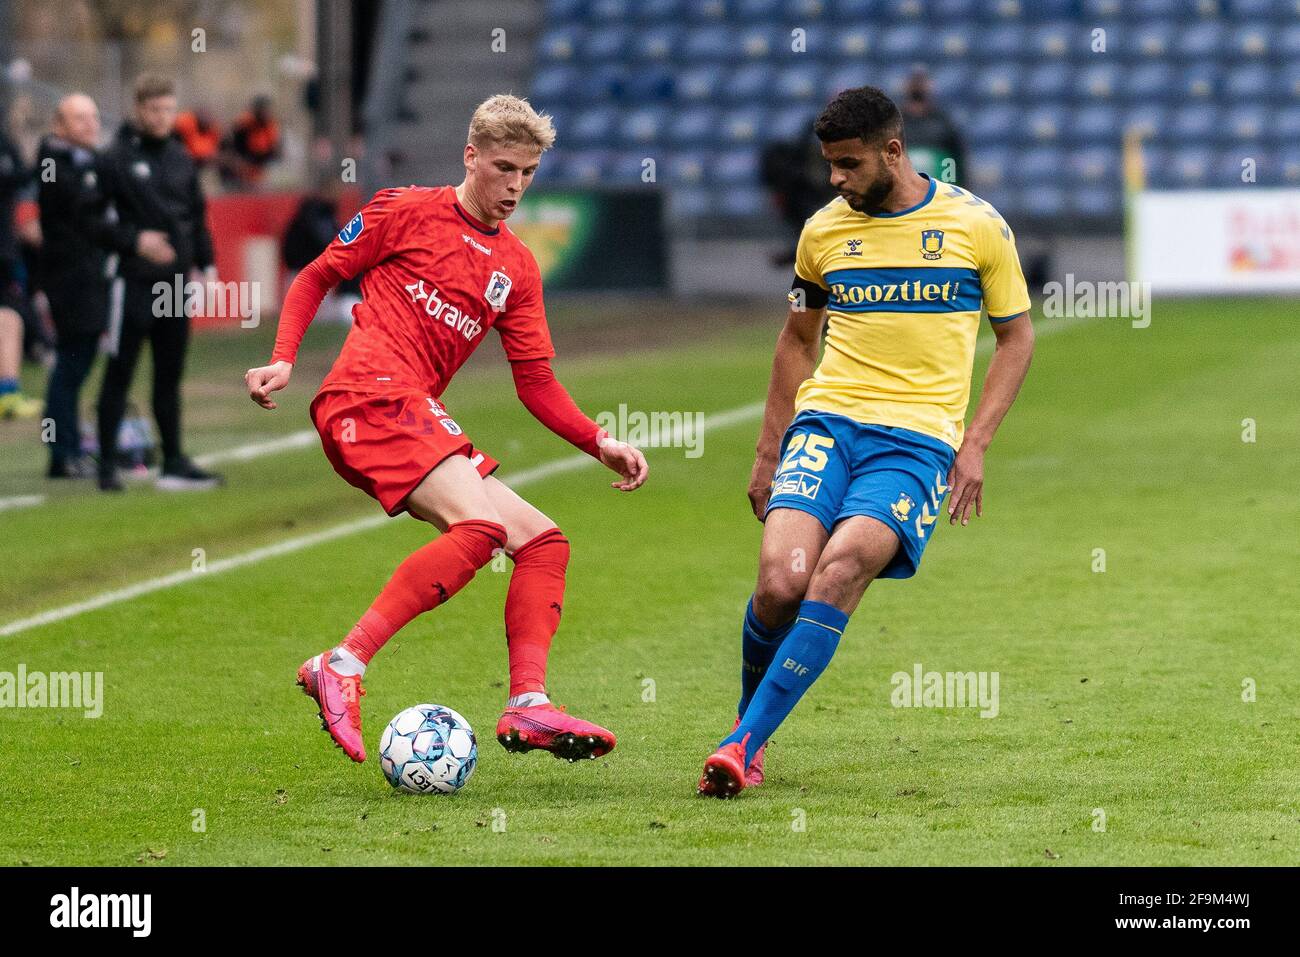 Brondby, Denmark. 18th Apr, 2021. Albert Gronbaek (27) of Aarhus GF and Anis Ben Slimane (25) of Brondby IF seen during the 3F Superliga match between FC Brondby IF and Aarhus GF Brondby Stadion in Brondby. (Photo Credit: Gonzales Photo/Alamy Live News Stock Photo